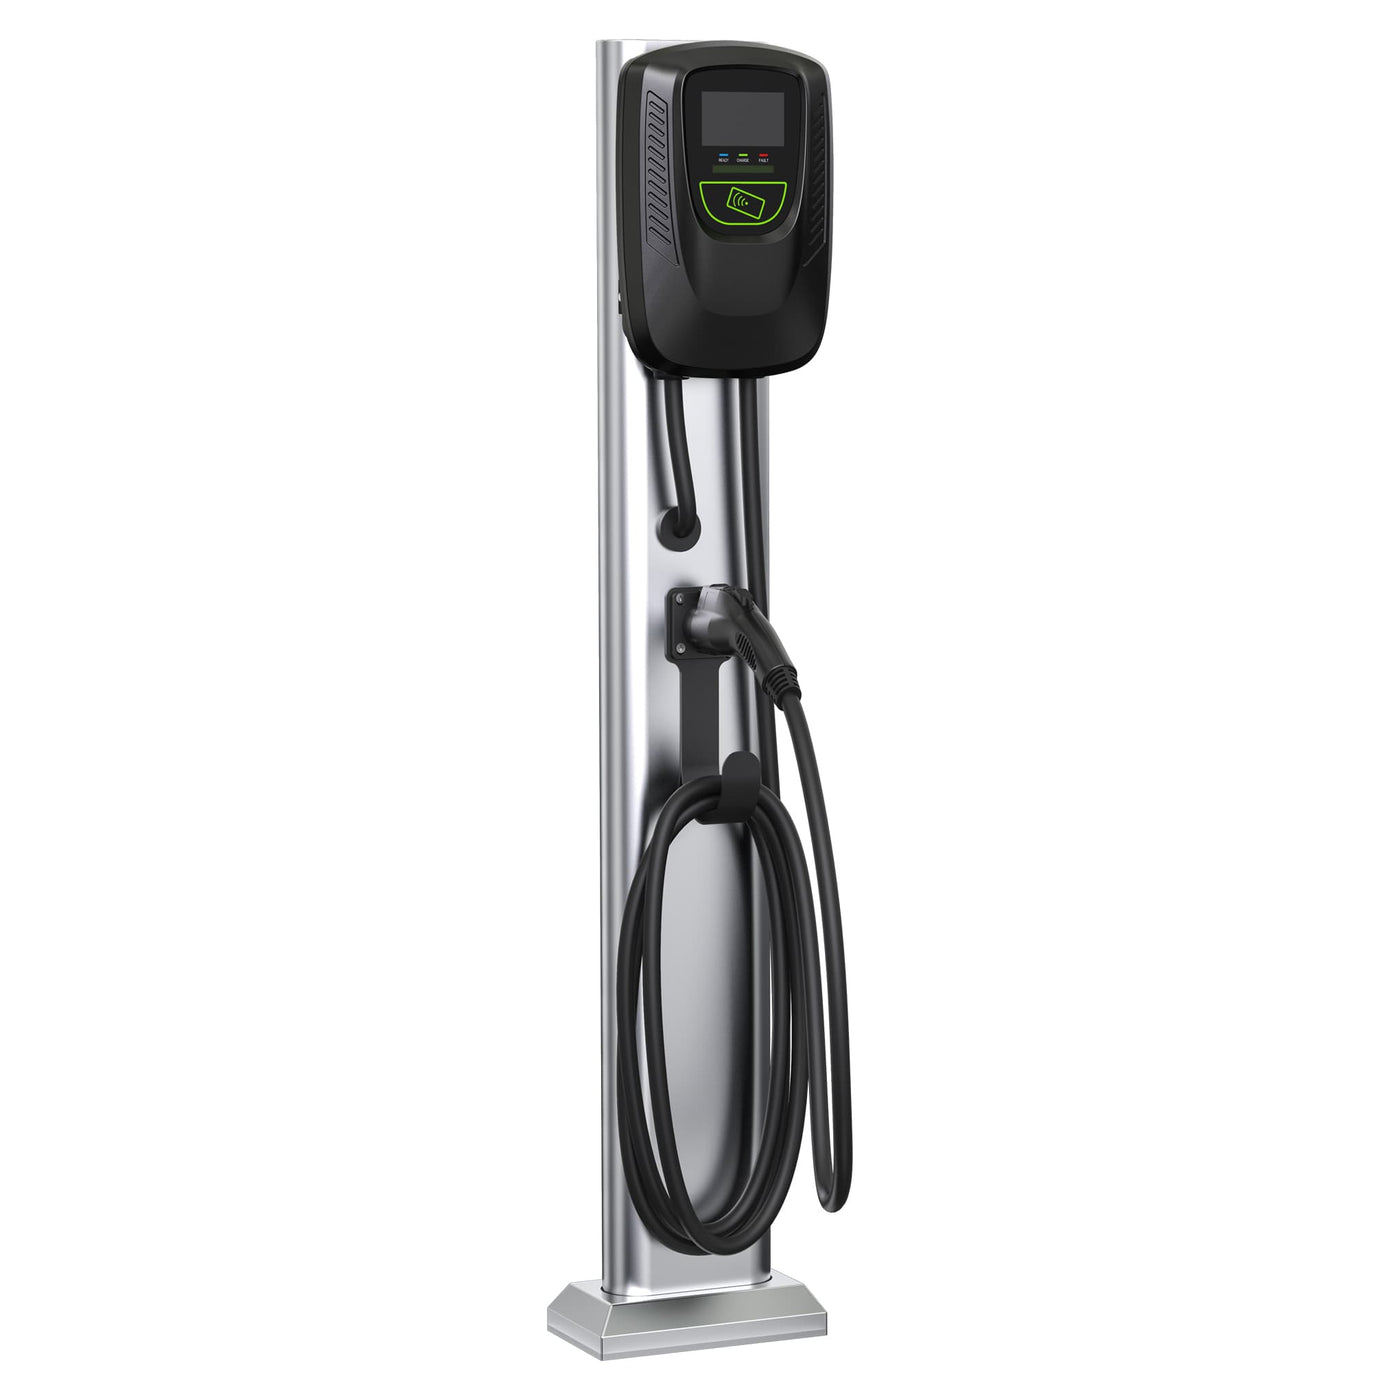 Hwisel EV Smart Charger Commercial Level 2 48 amp with Stand 1 Image Size 2040x2040